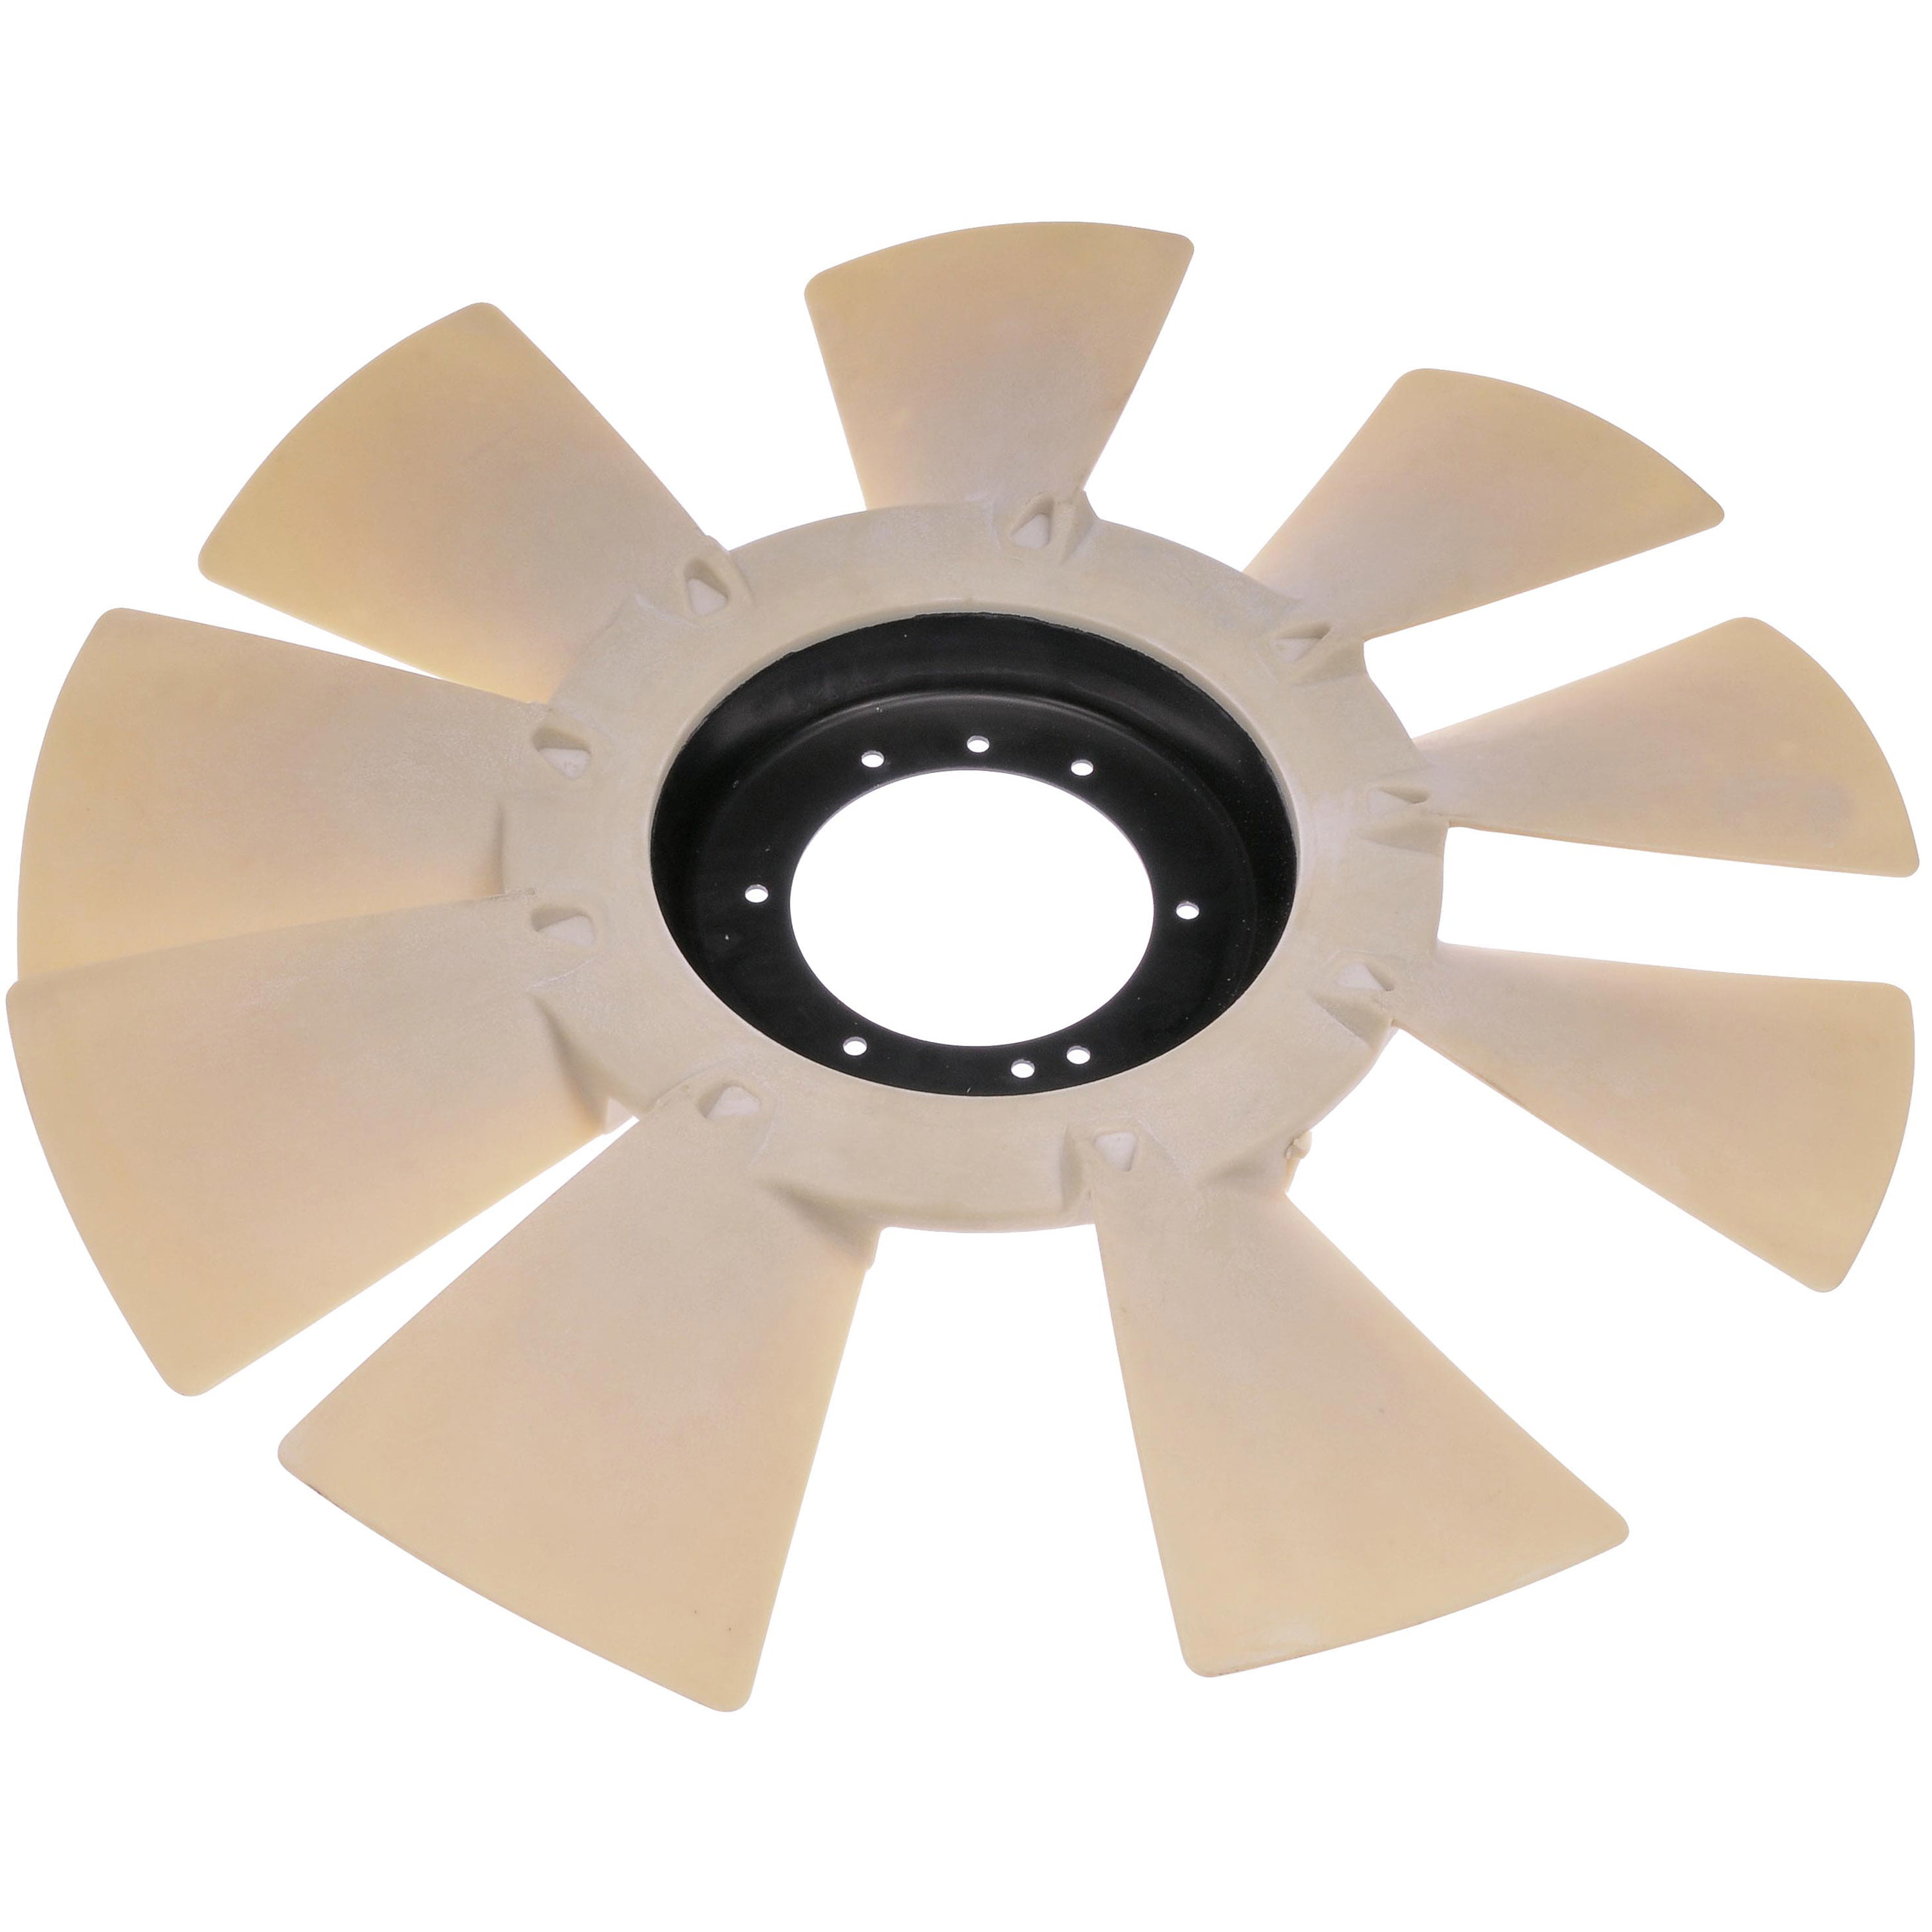 Dorman Products 620-112 Cooling Fan Clutch and Motor Engine Cooling Fan Blade